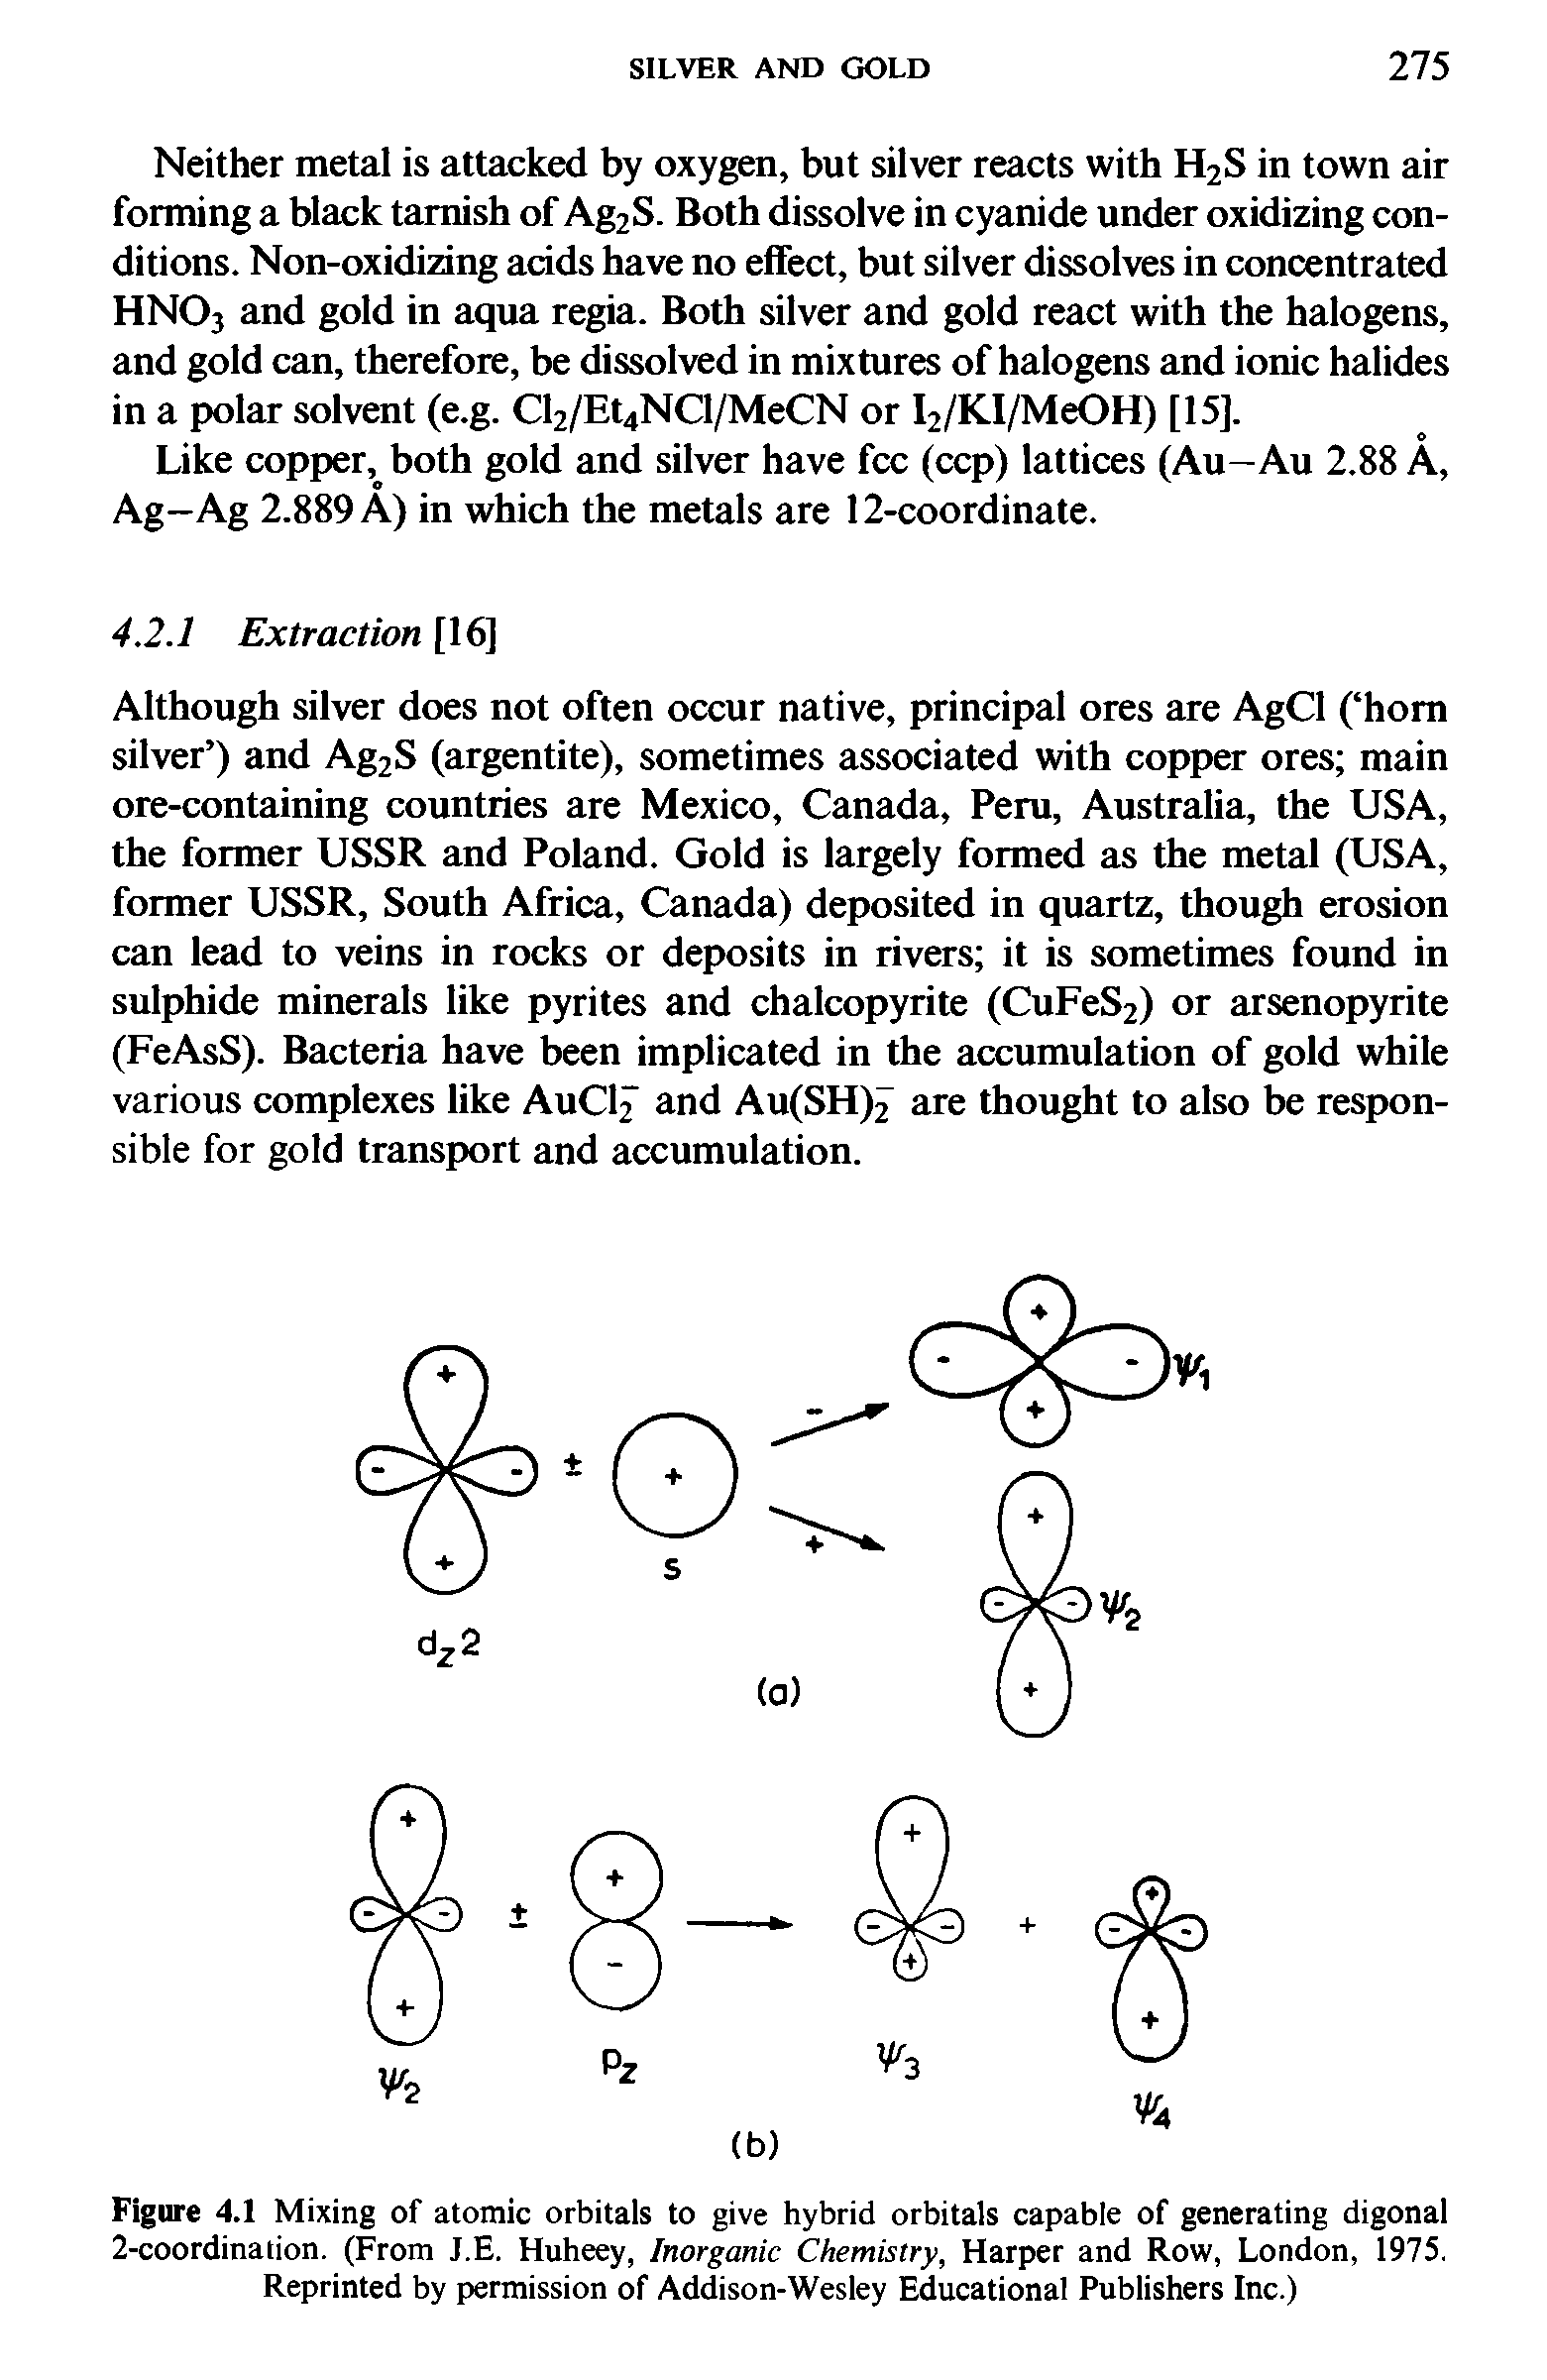 Figure 4.1 Mixing of atomic orbitals to give hybrid orbitals capable of generating digonal 2-coordination. (From J.E. Huheey, Inorganic Chemistry, Harper and Row, London, 1975. Reprinted by permission of Addison-Wesley Educational Publishers Inc.)...